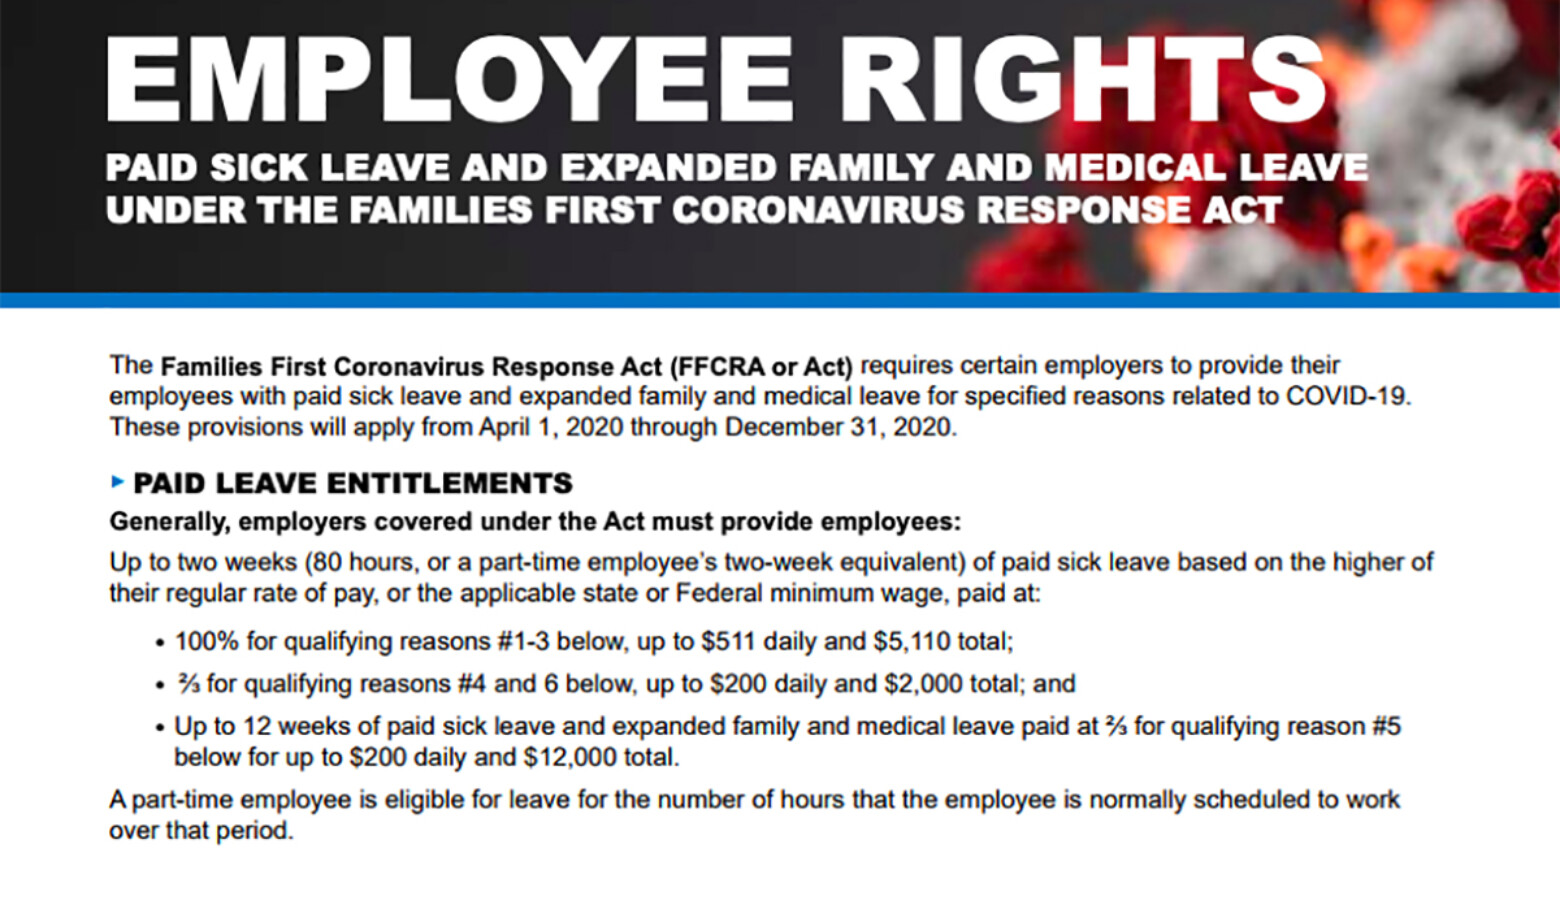 A guidance poster issued by the Department of Labor for employers to follow new paid leave rules. (Courtesy U.S. Department of Labor)